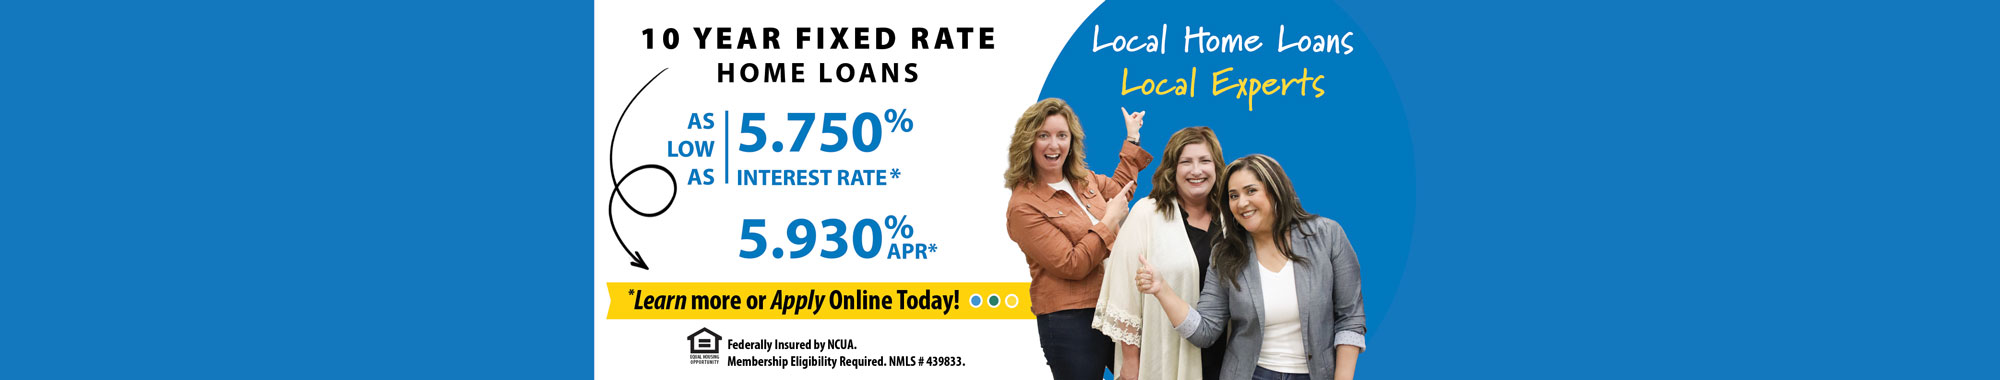 10 Year Fixed Rate Home Loans - Learn More!